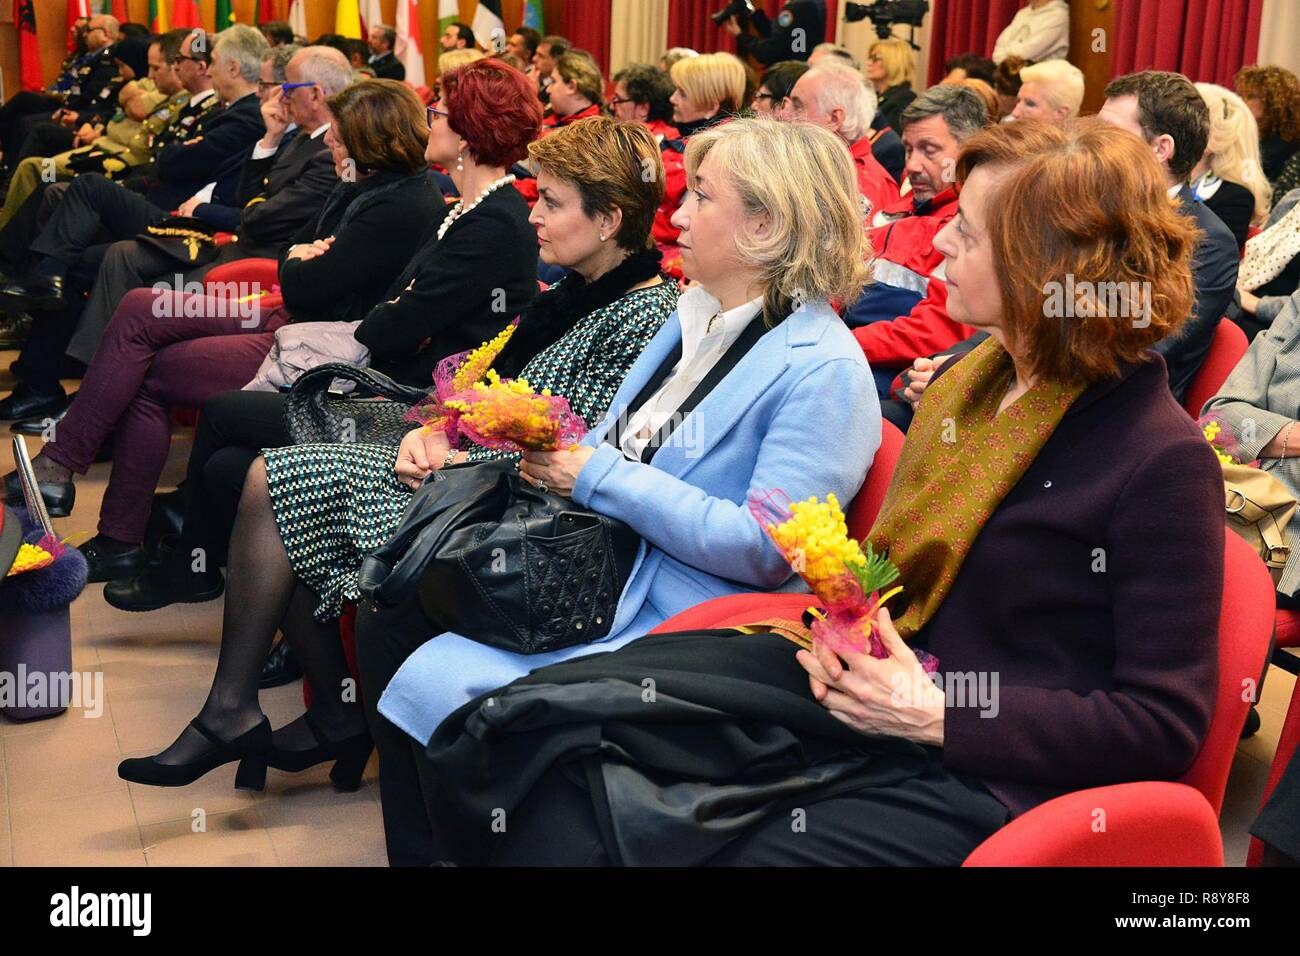 Italian female guests participate in the opening ceremony of the 5th “Gender Protection in Peace Operations” Course at the  Center of Excellence for Stability Police Units (CoESPU) in Vicenza, Italy, Mar. 8, 2017. The event brought together military and civic leaders of the local community and offered the opportunity to celebrate International Women's Day. Stock Photo